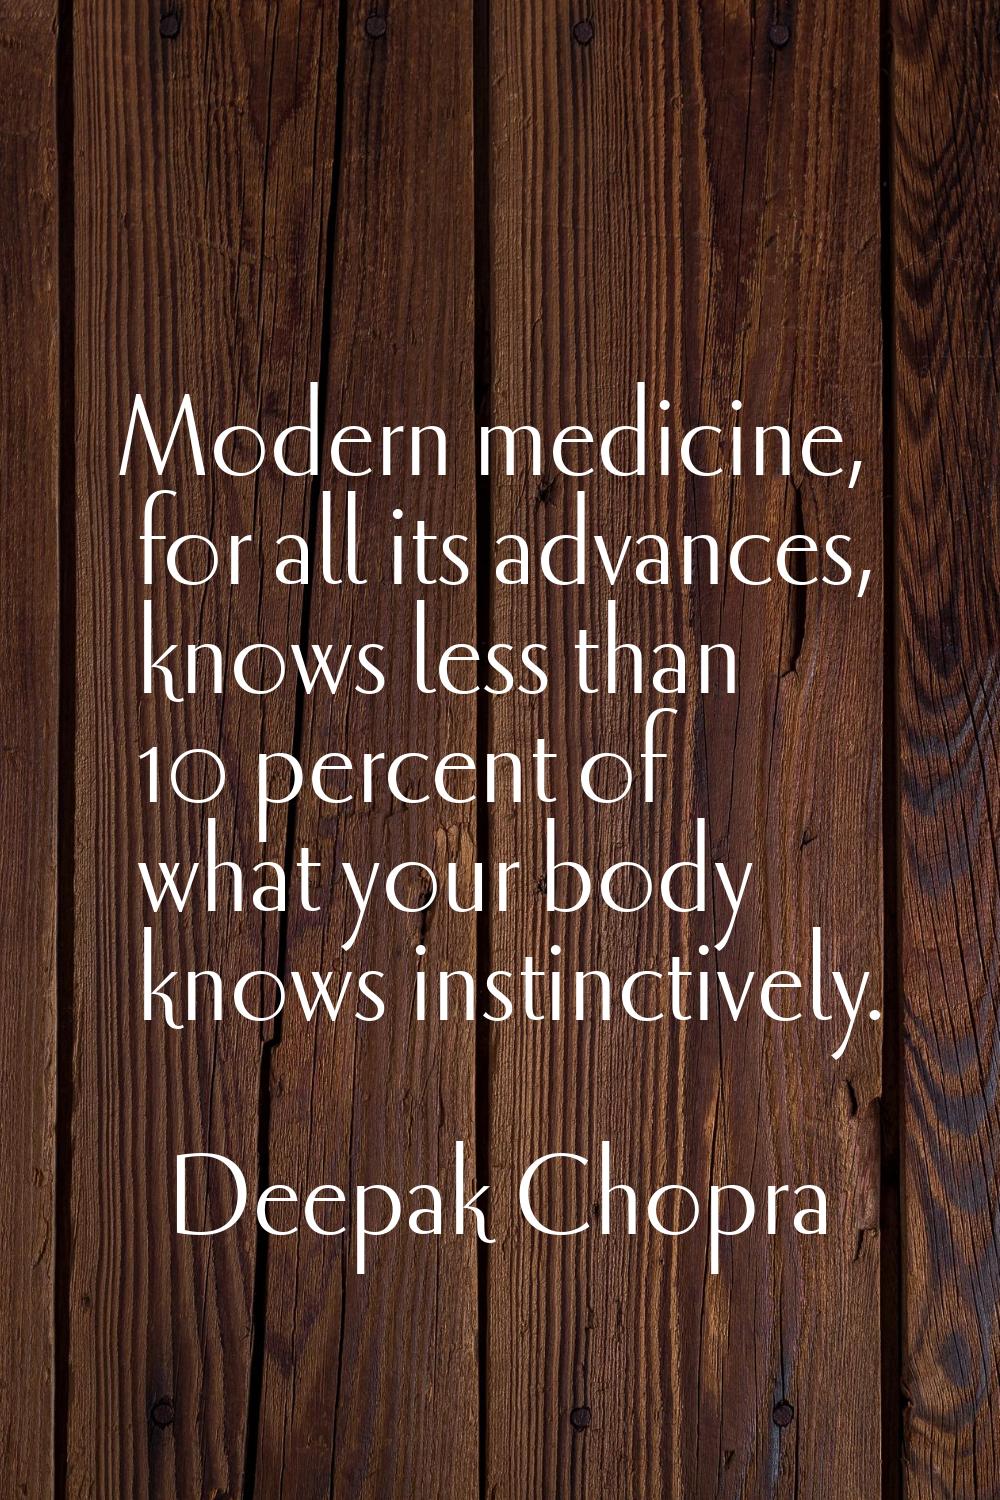 Modern medicine, for all its advances, knows less than 10 percent of what your body knows instincti